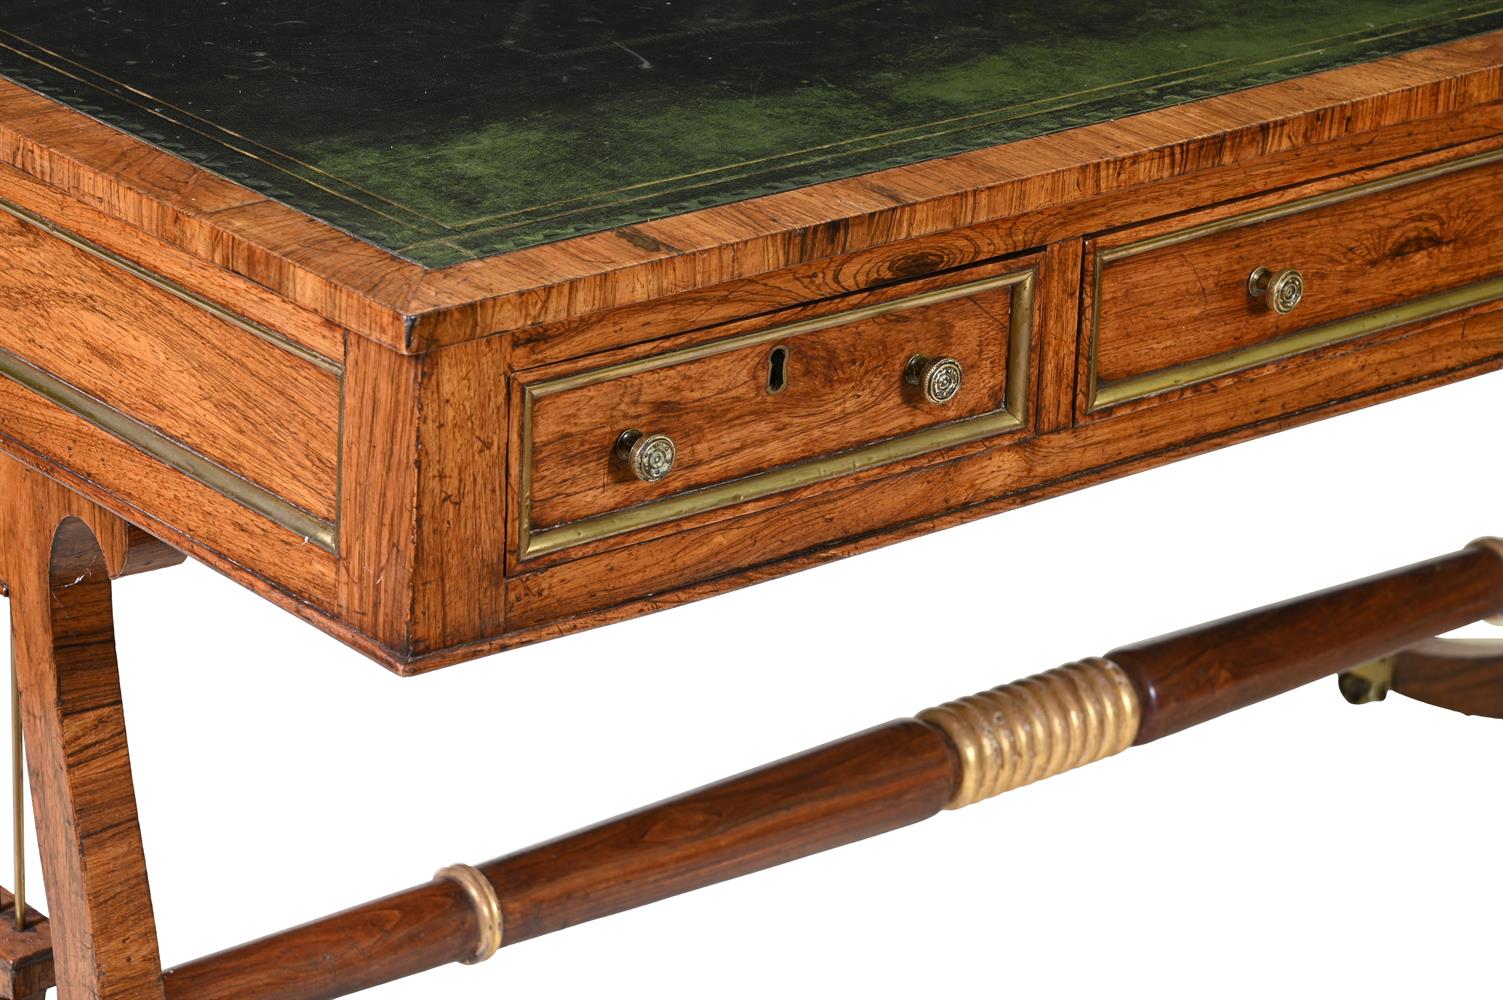 Y A REGENCY BRASS MOUNTED ROSEWOOD LIBRARY TABLE, EARLY 19TH CENTURY - Image 2 of 2